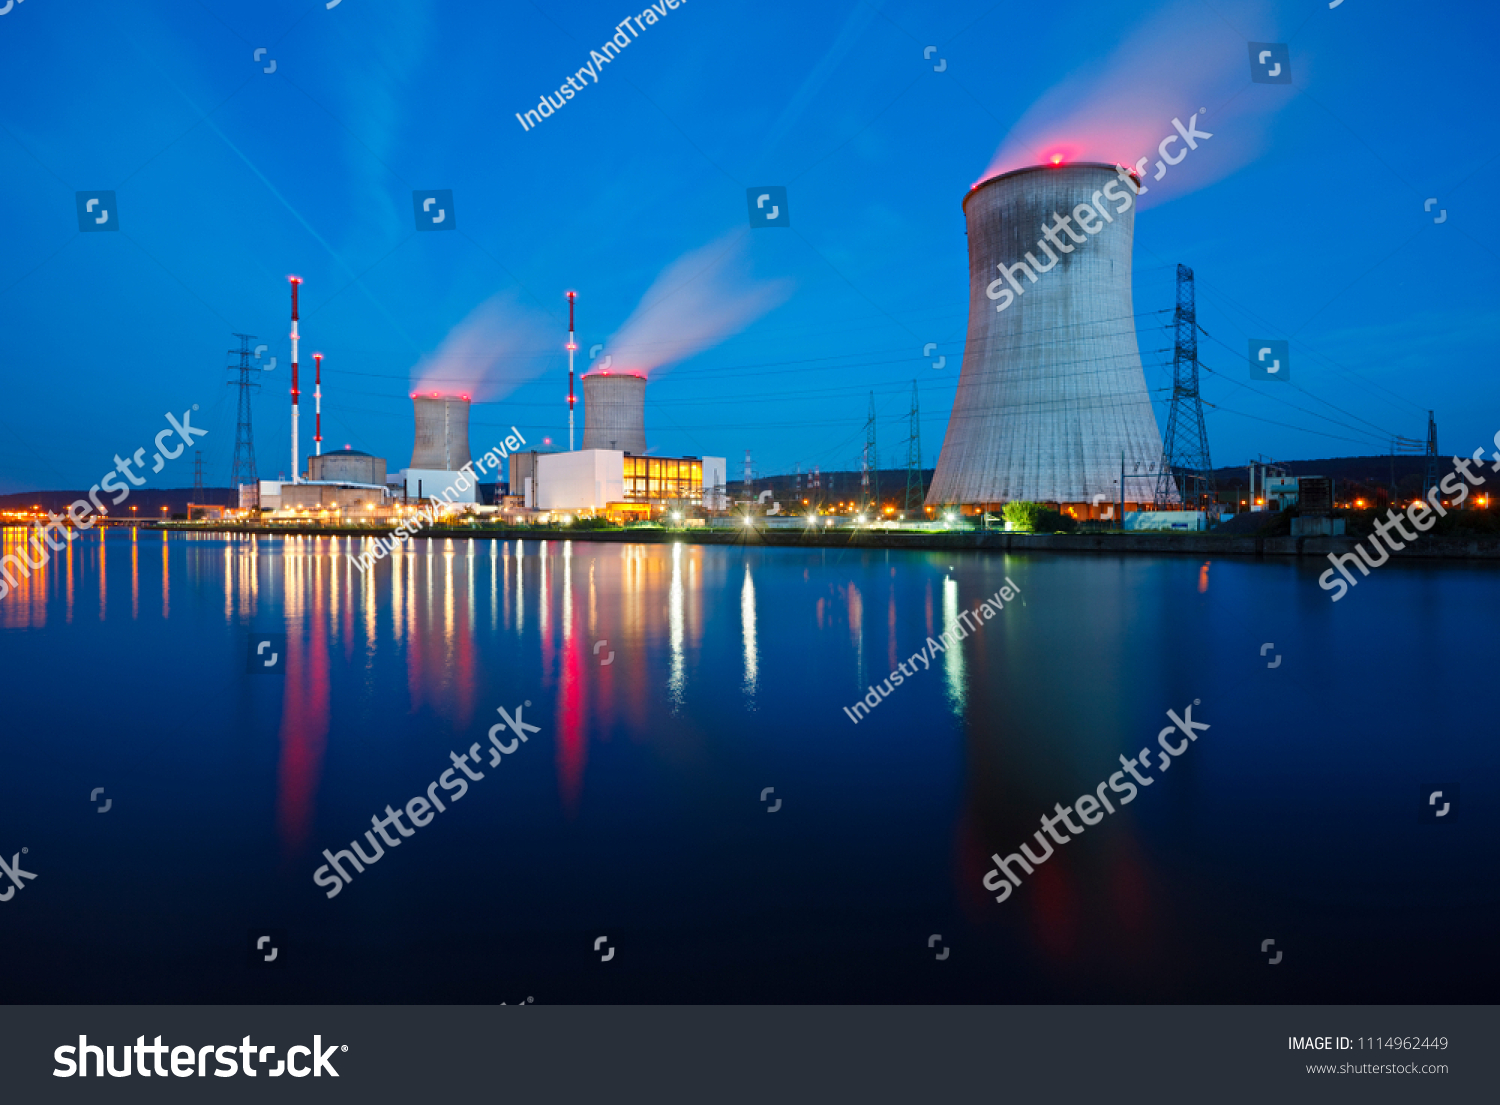 Night shot of a nuclear power plant close at a river with blue night sky. #1114962449